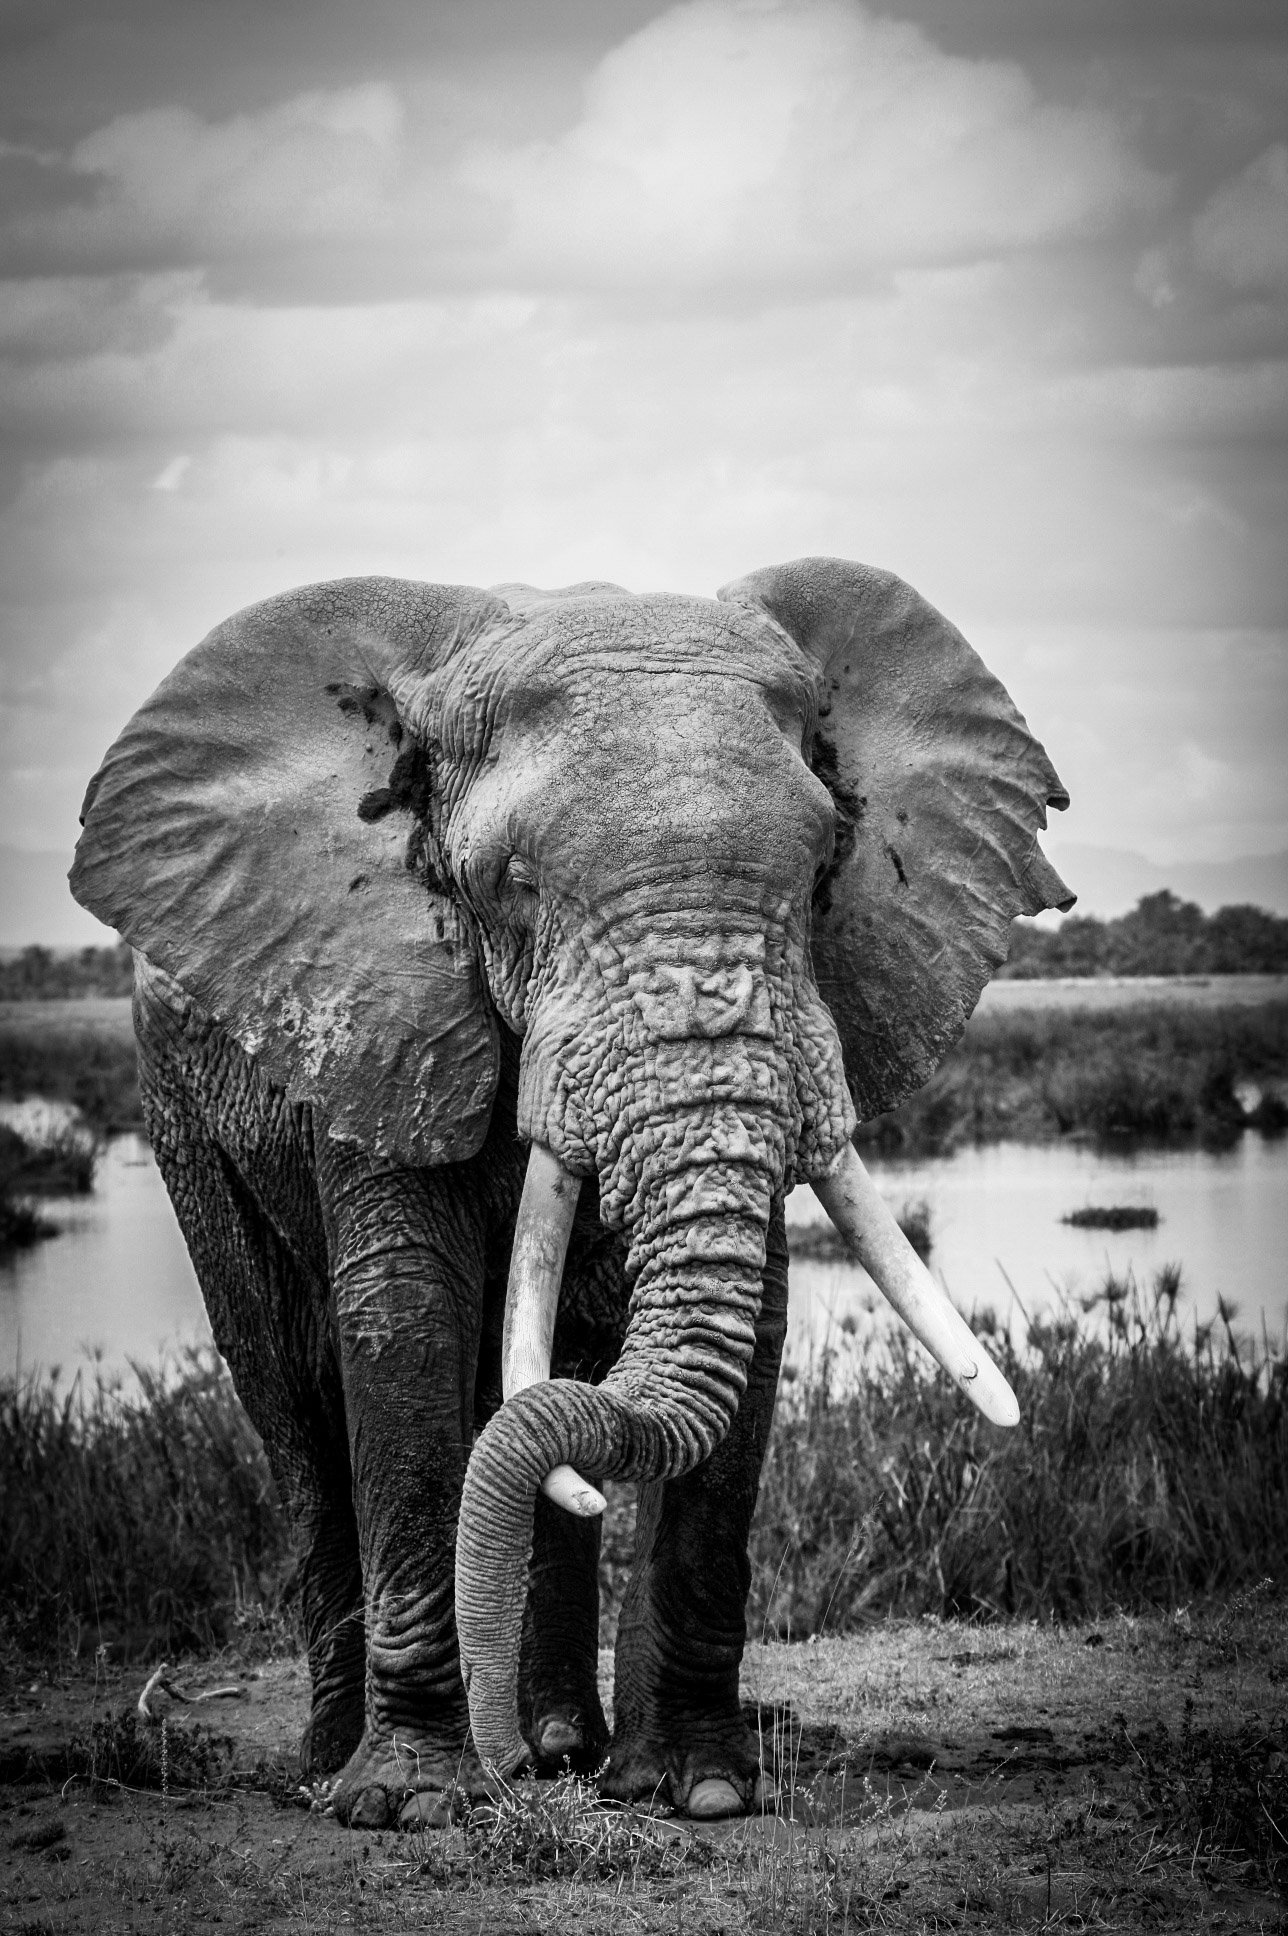 African Elephant in Black and White to empties the rugged elegance of the beauty within his sole.  Bring home the power and beauty...